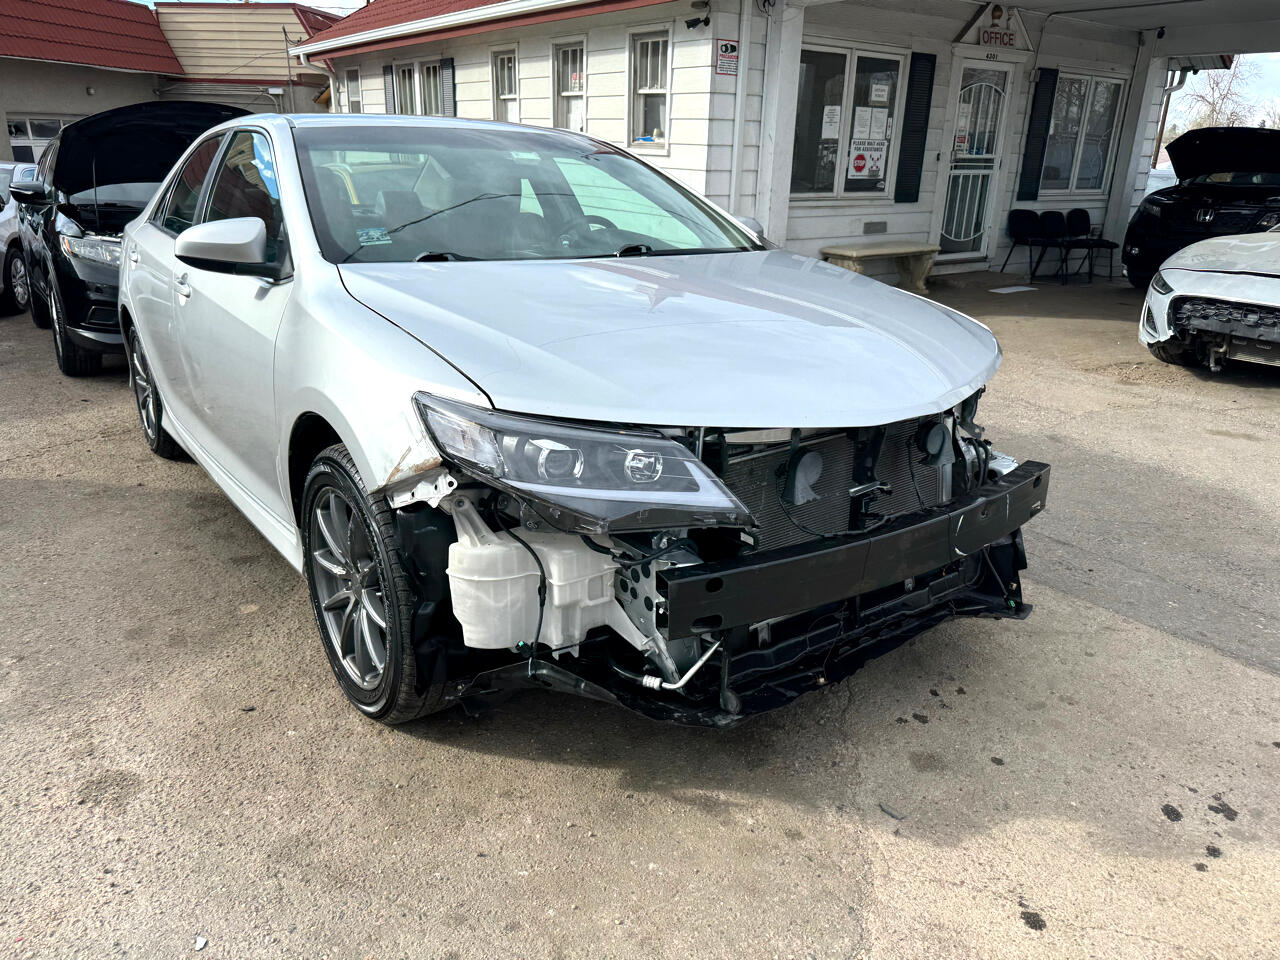 2013 Toyota Camry 4dr Sdn I4 Auto XLE (Natl)